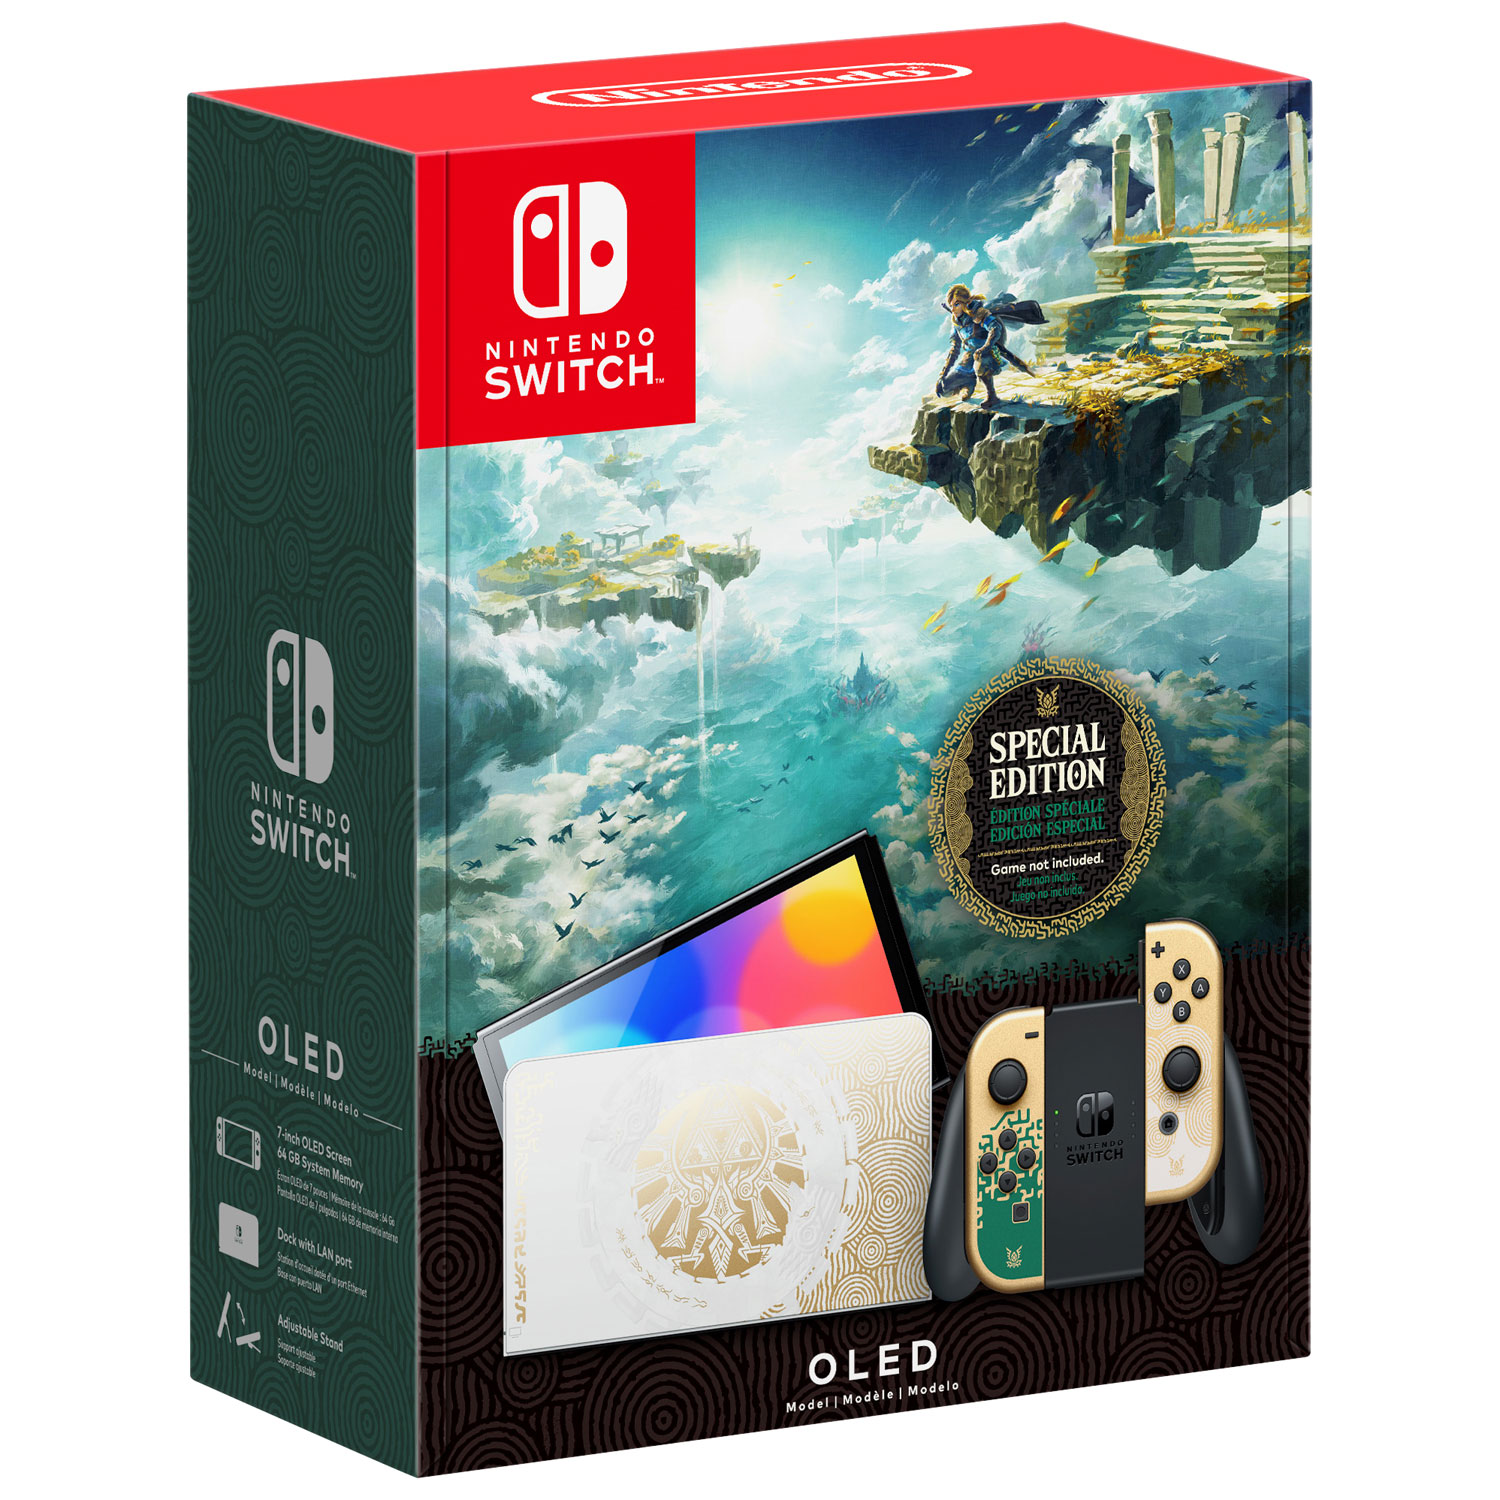 Nintendo Switch (OLED Model) Console - The Legend of Zelda: Tears of the Kingdom Edition